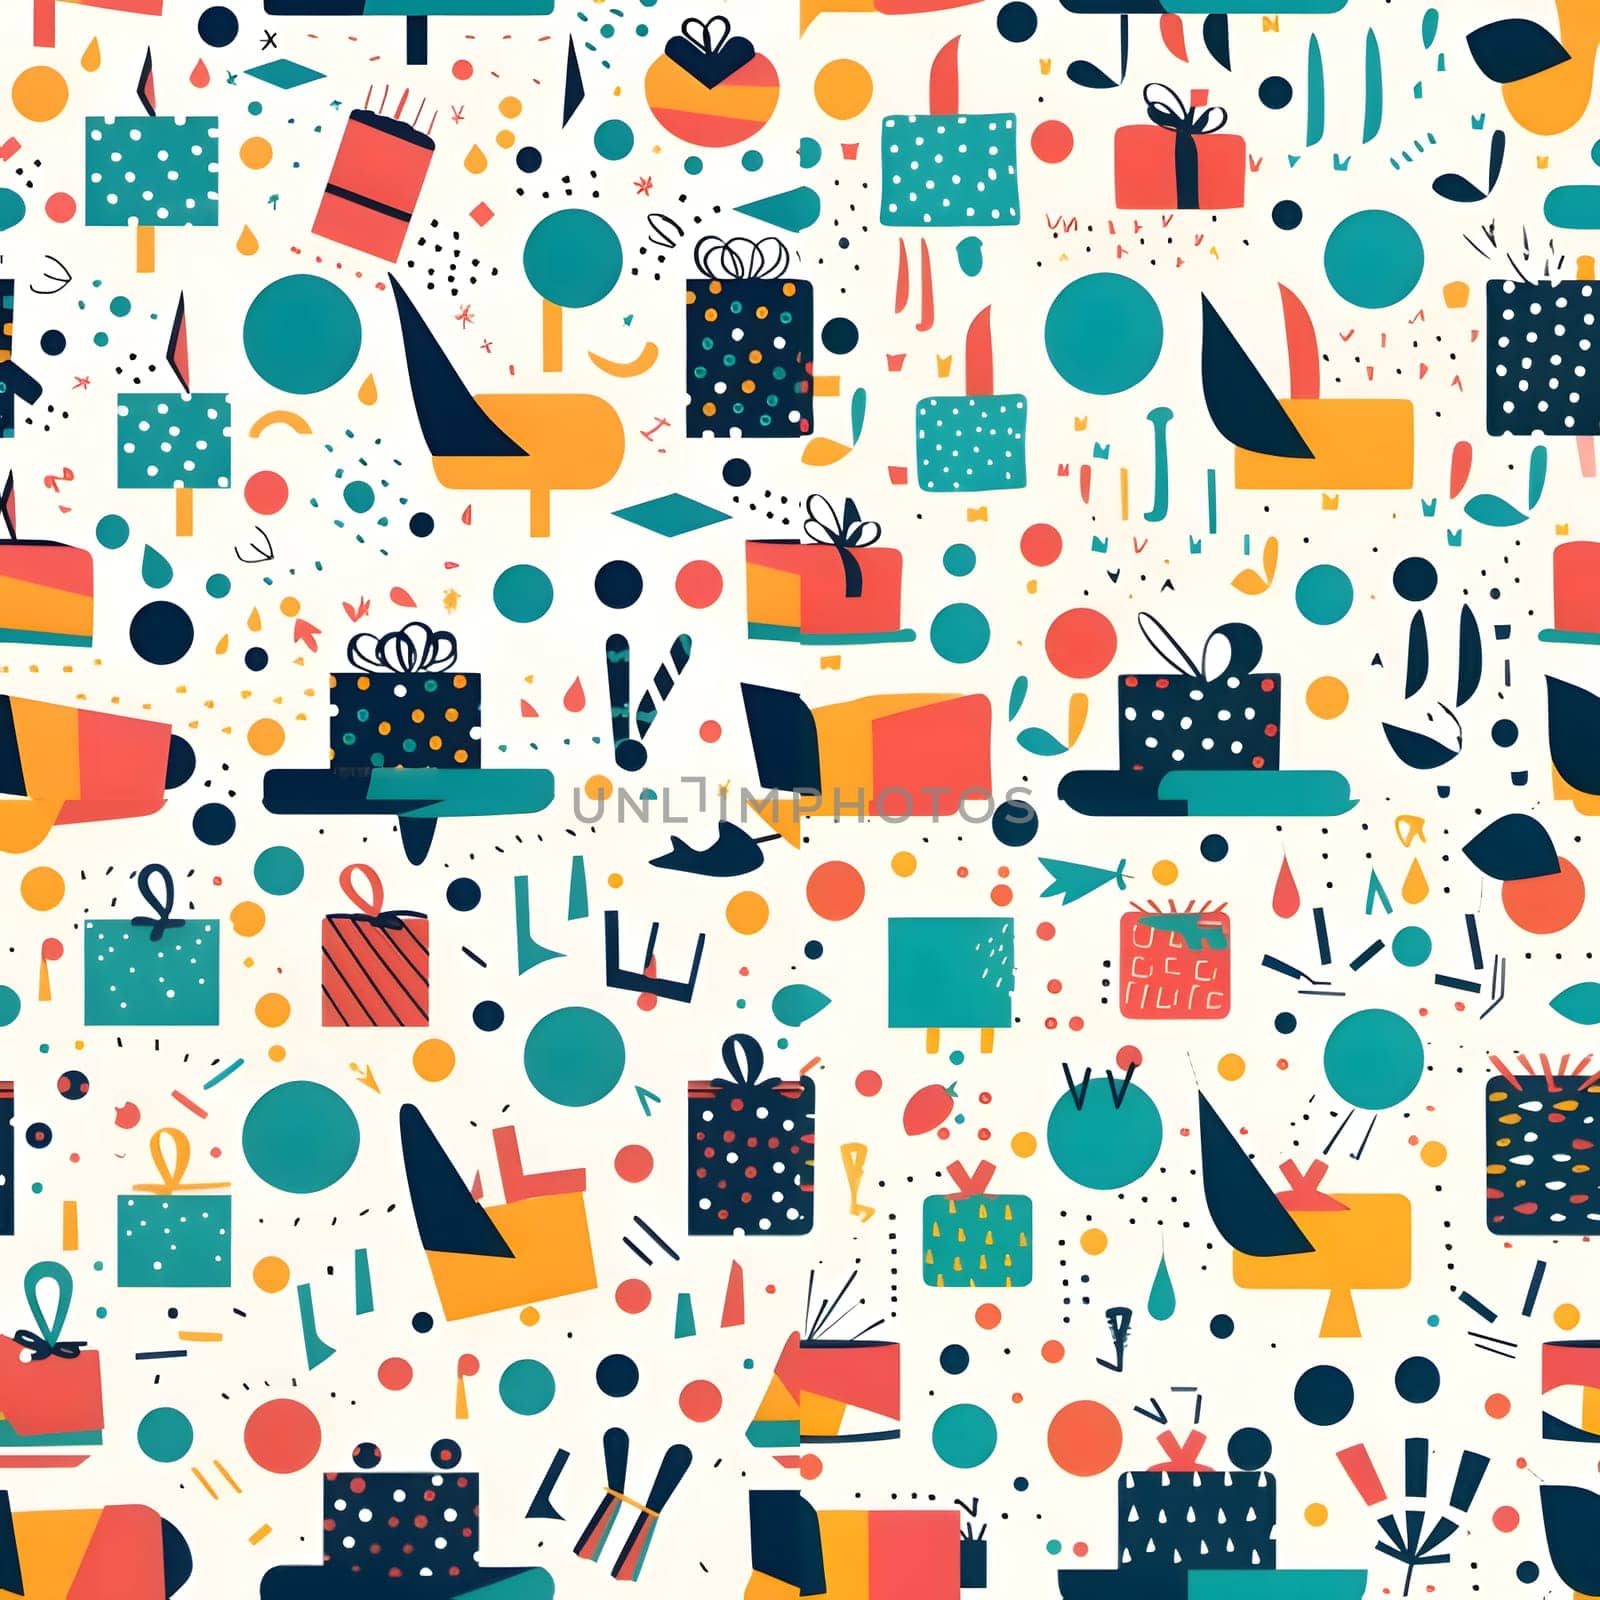 Patterns and banners backgrounds: Seamless pattern with gift boxes. Vector illustration in flat style.